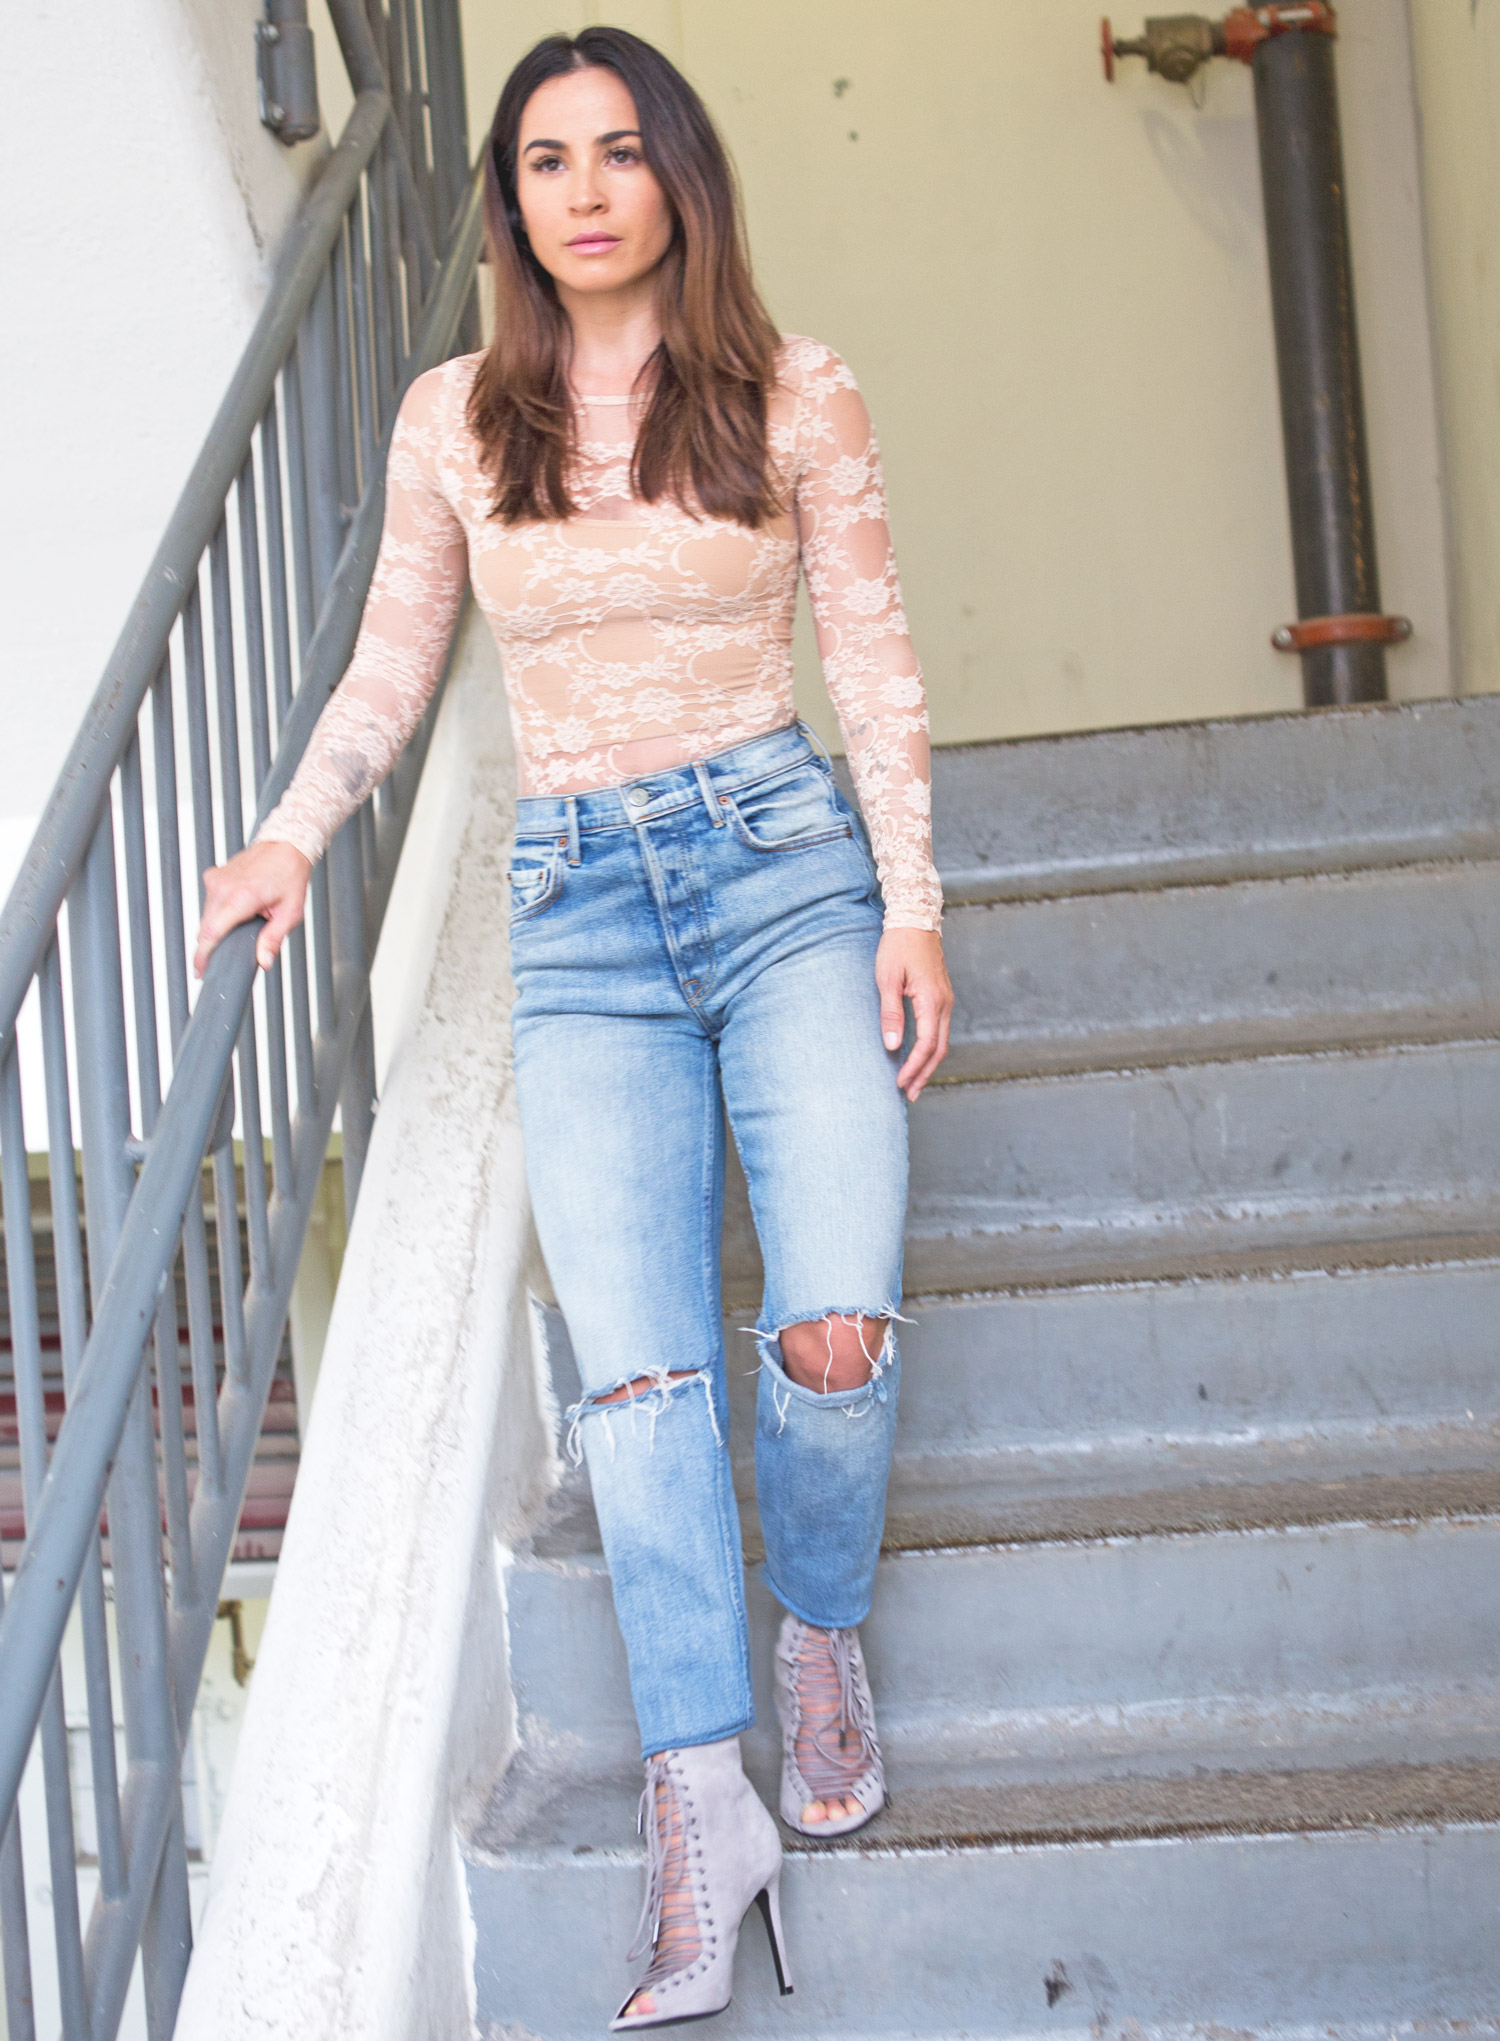 Style Series: Celebrity Style Challenge - Lace Bodysuit and High Waist Jeans  — YOGABYCANDACE